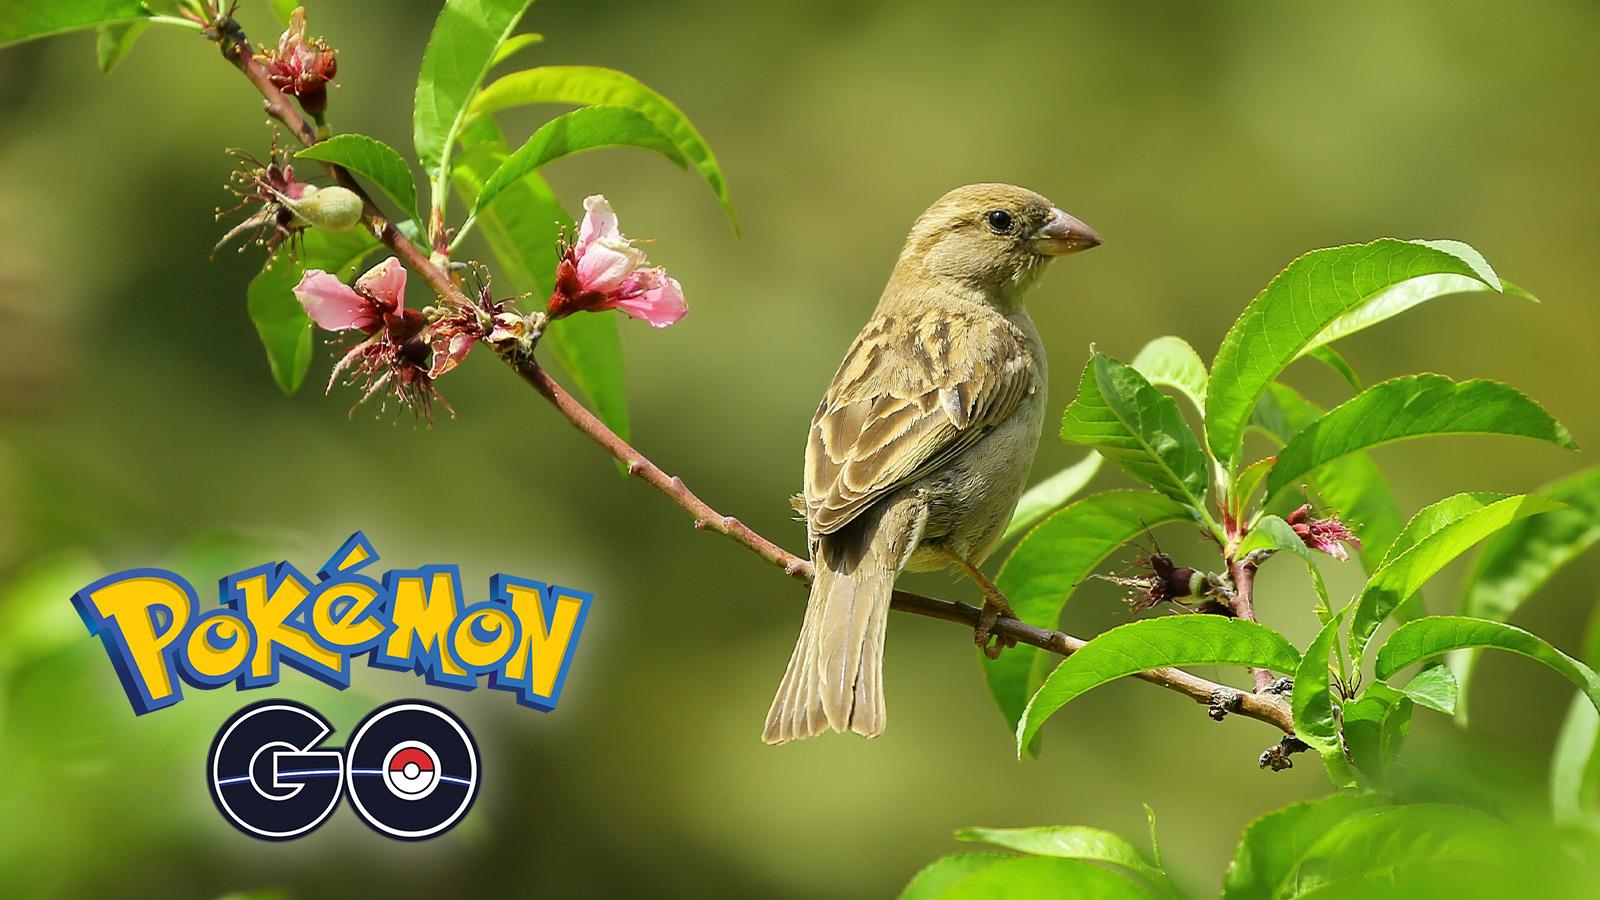 pokemon go logo on a picture of a bird